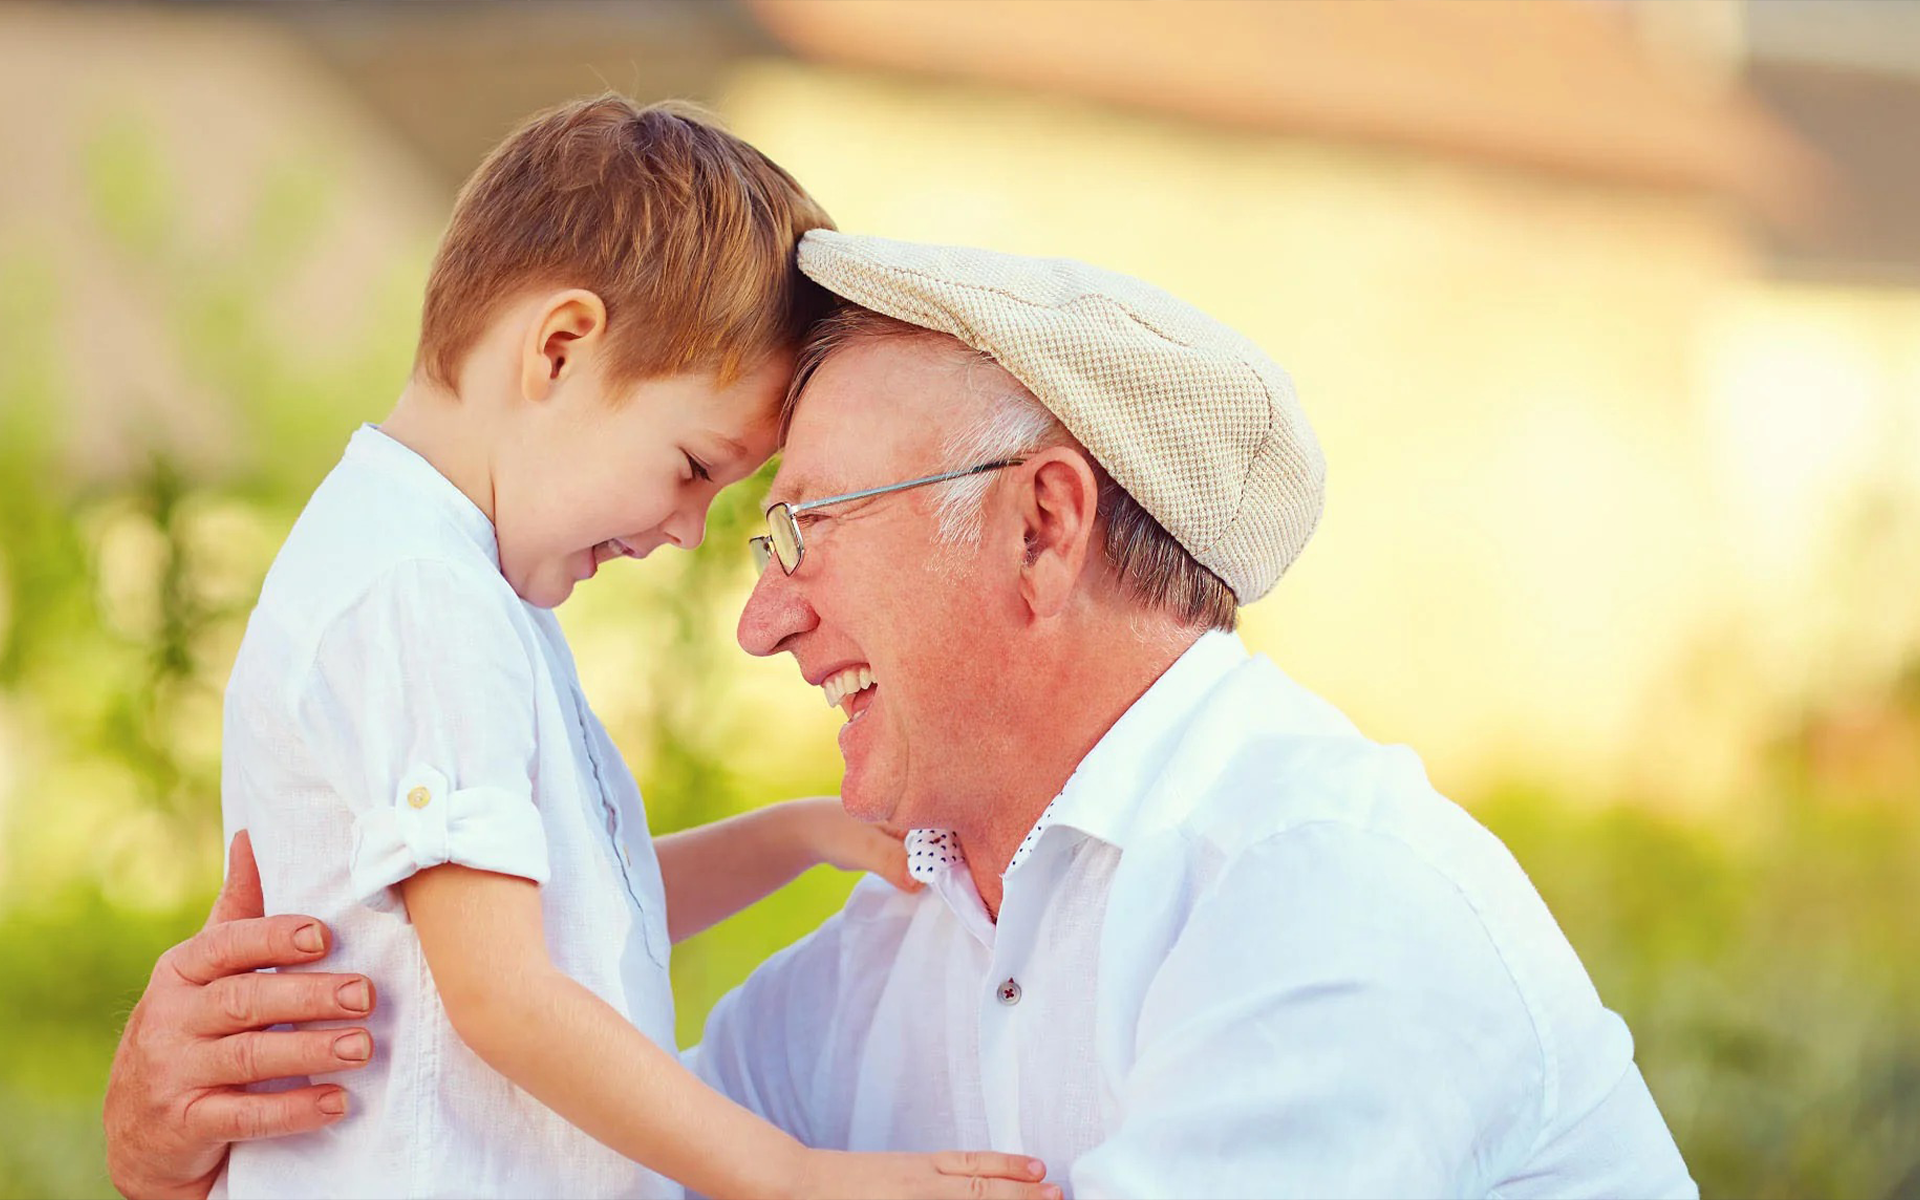 10 Memorable Gifts For Grandfather In 2022